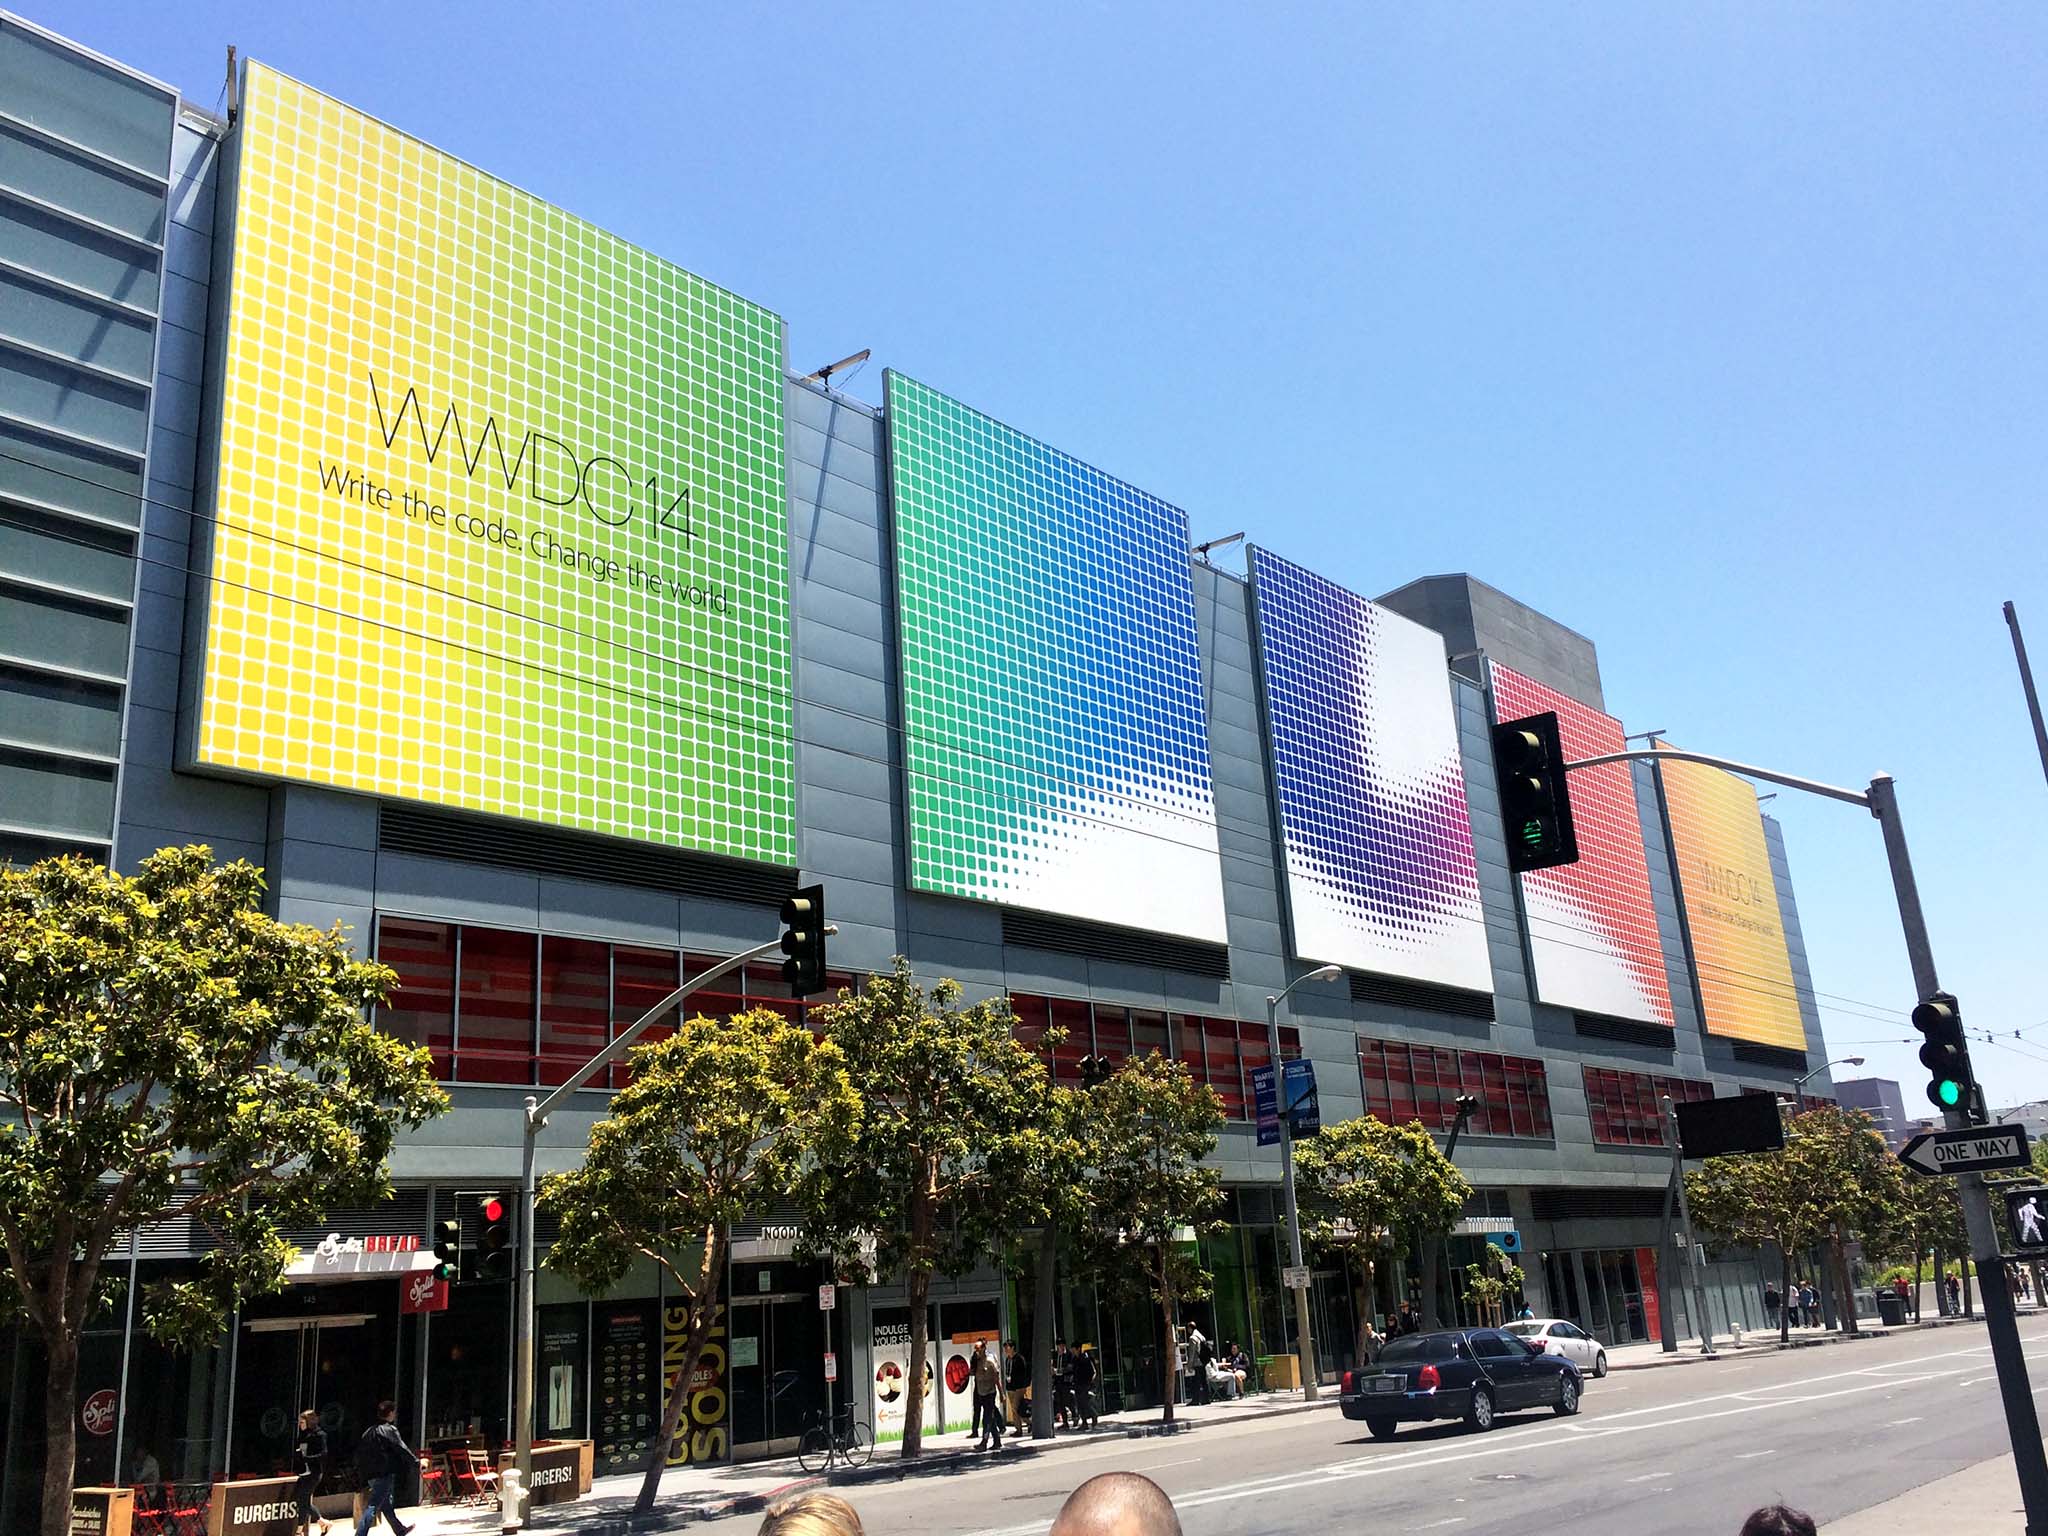 WWDC 2014 from a shareholder's perspective